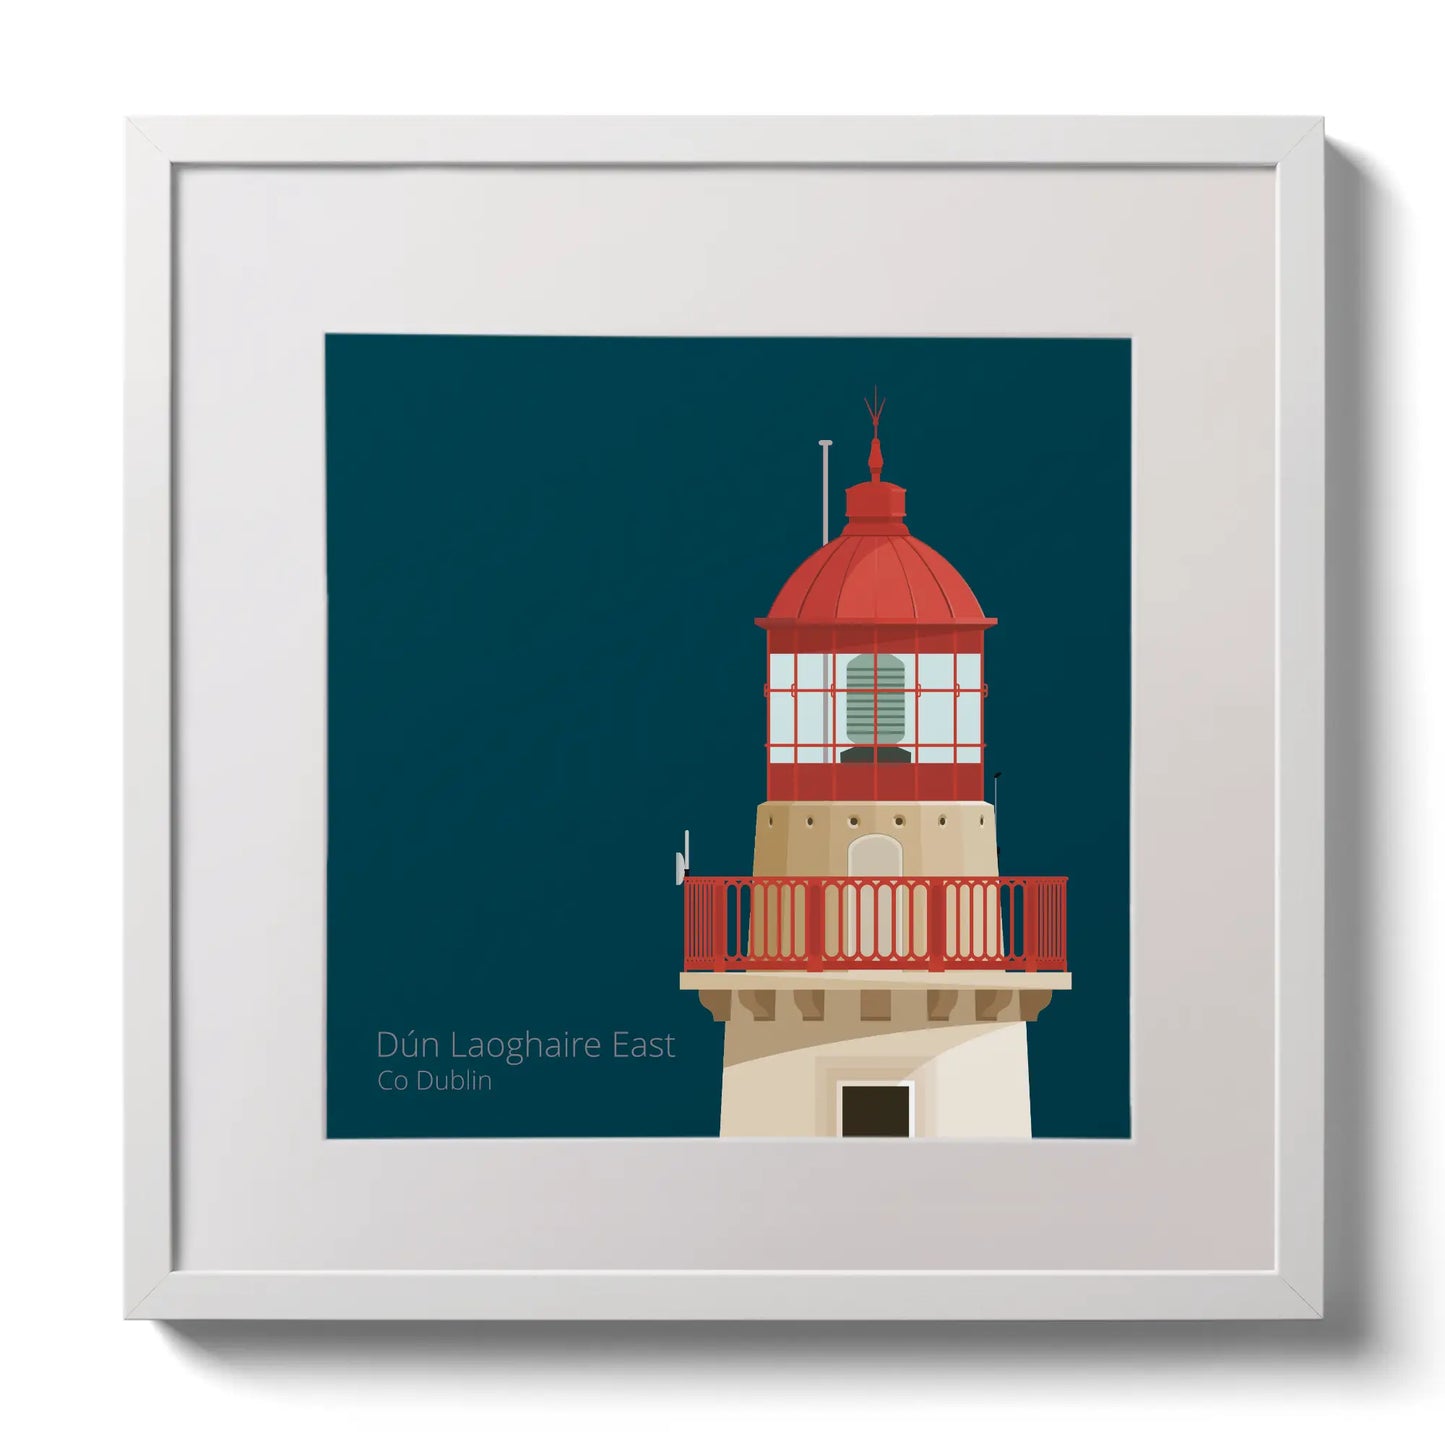 Illustration of Dún Laoghaire East lighthouse on a midnight blue background,  in a white square frame measuring 30x30cm.